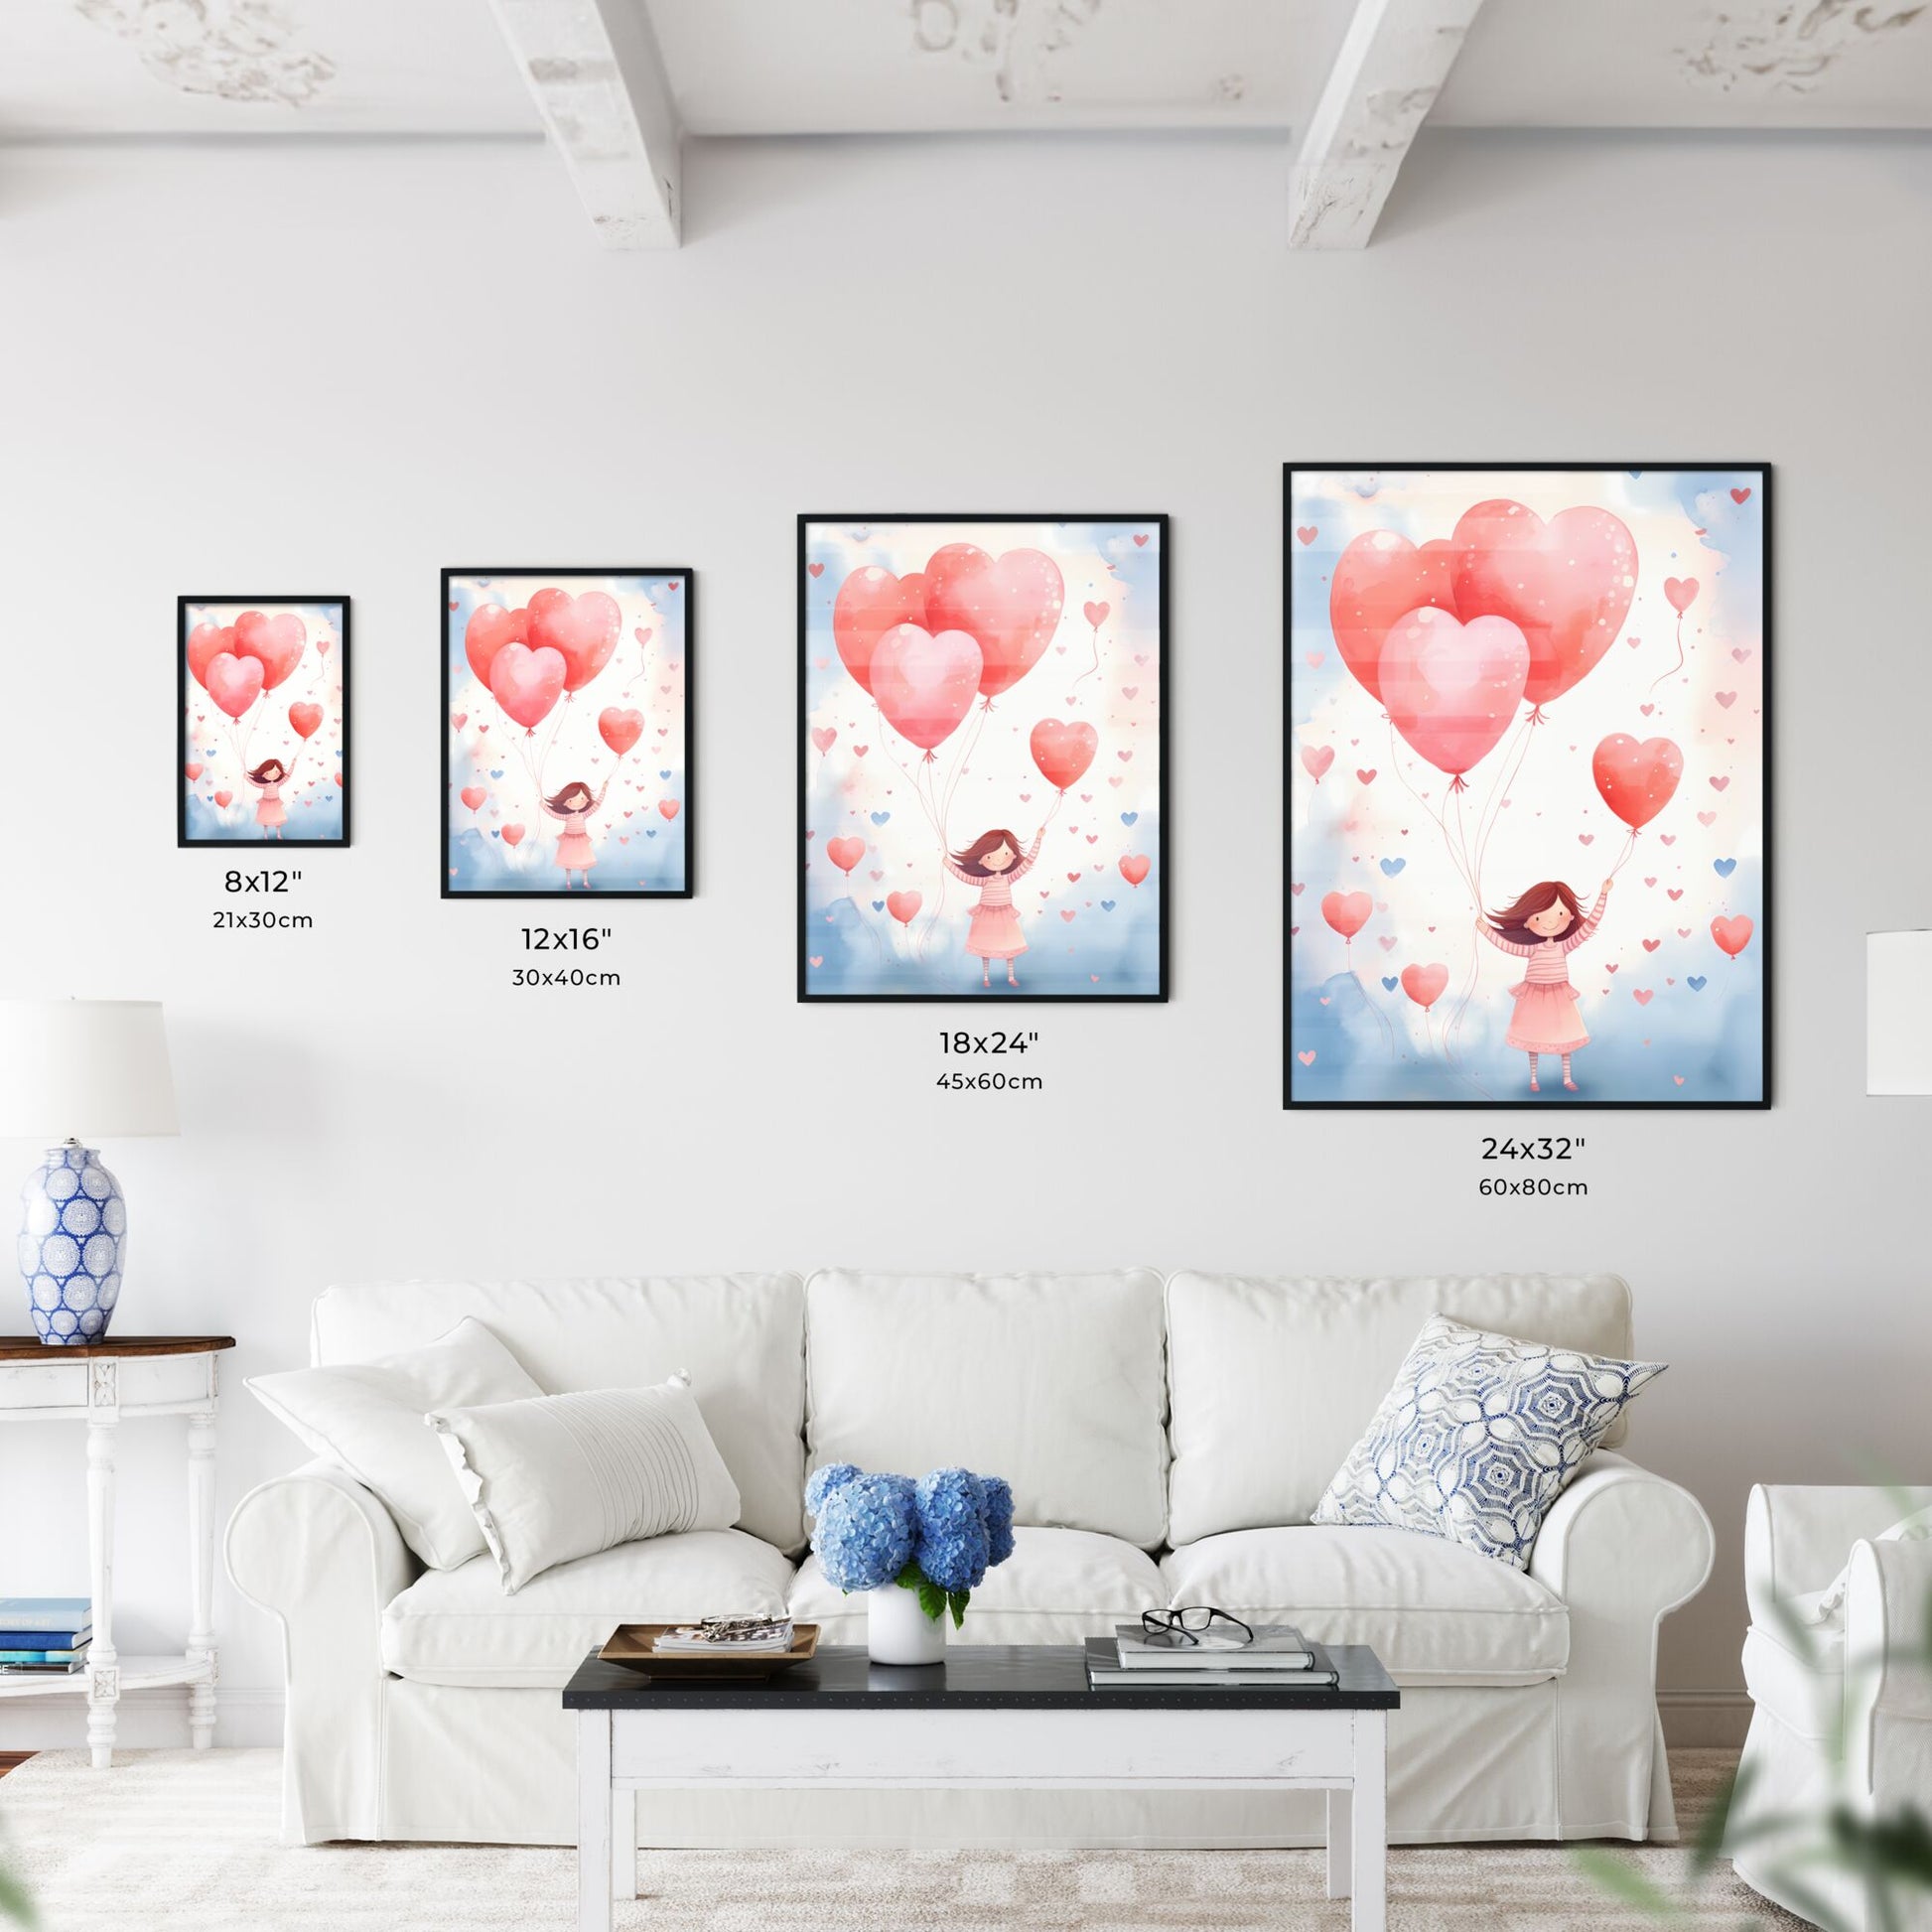 A Girl Holding Balloons In The Air Art Print Default Title